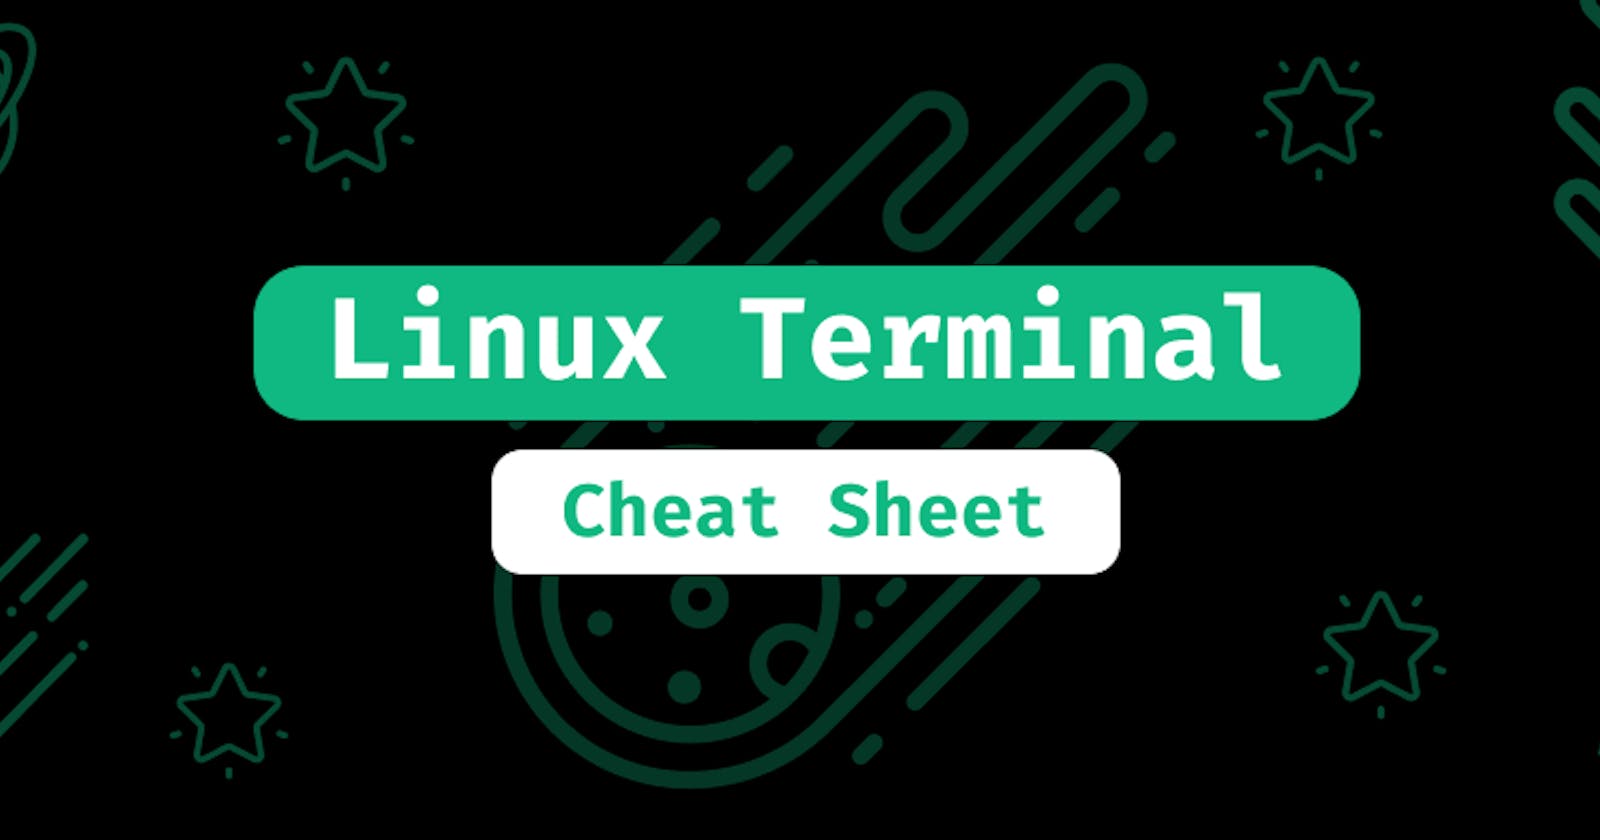 Linux Terminal - The Ultimate Cheat Sheet